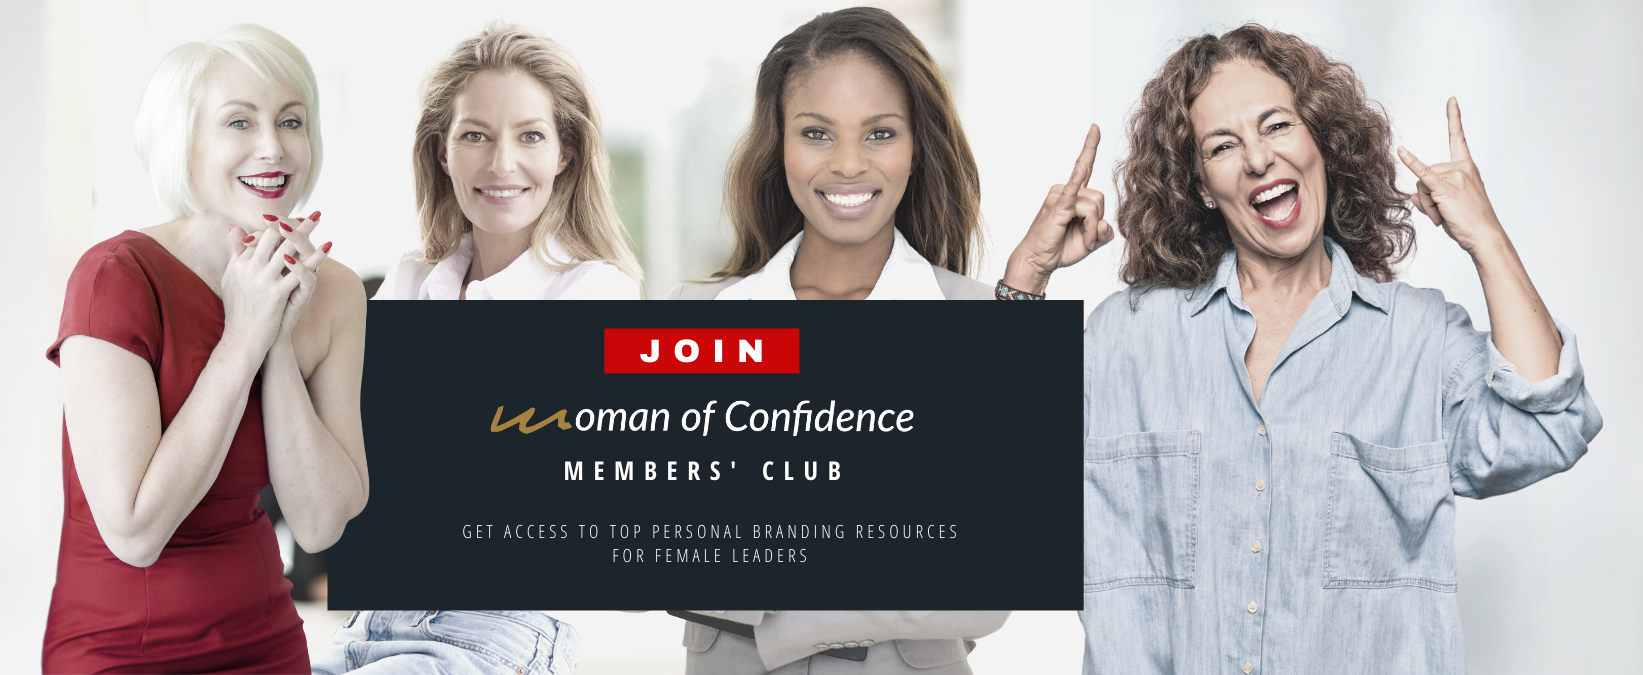 Confident Women inside Woman of Confidence Member's Club